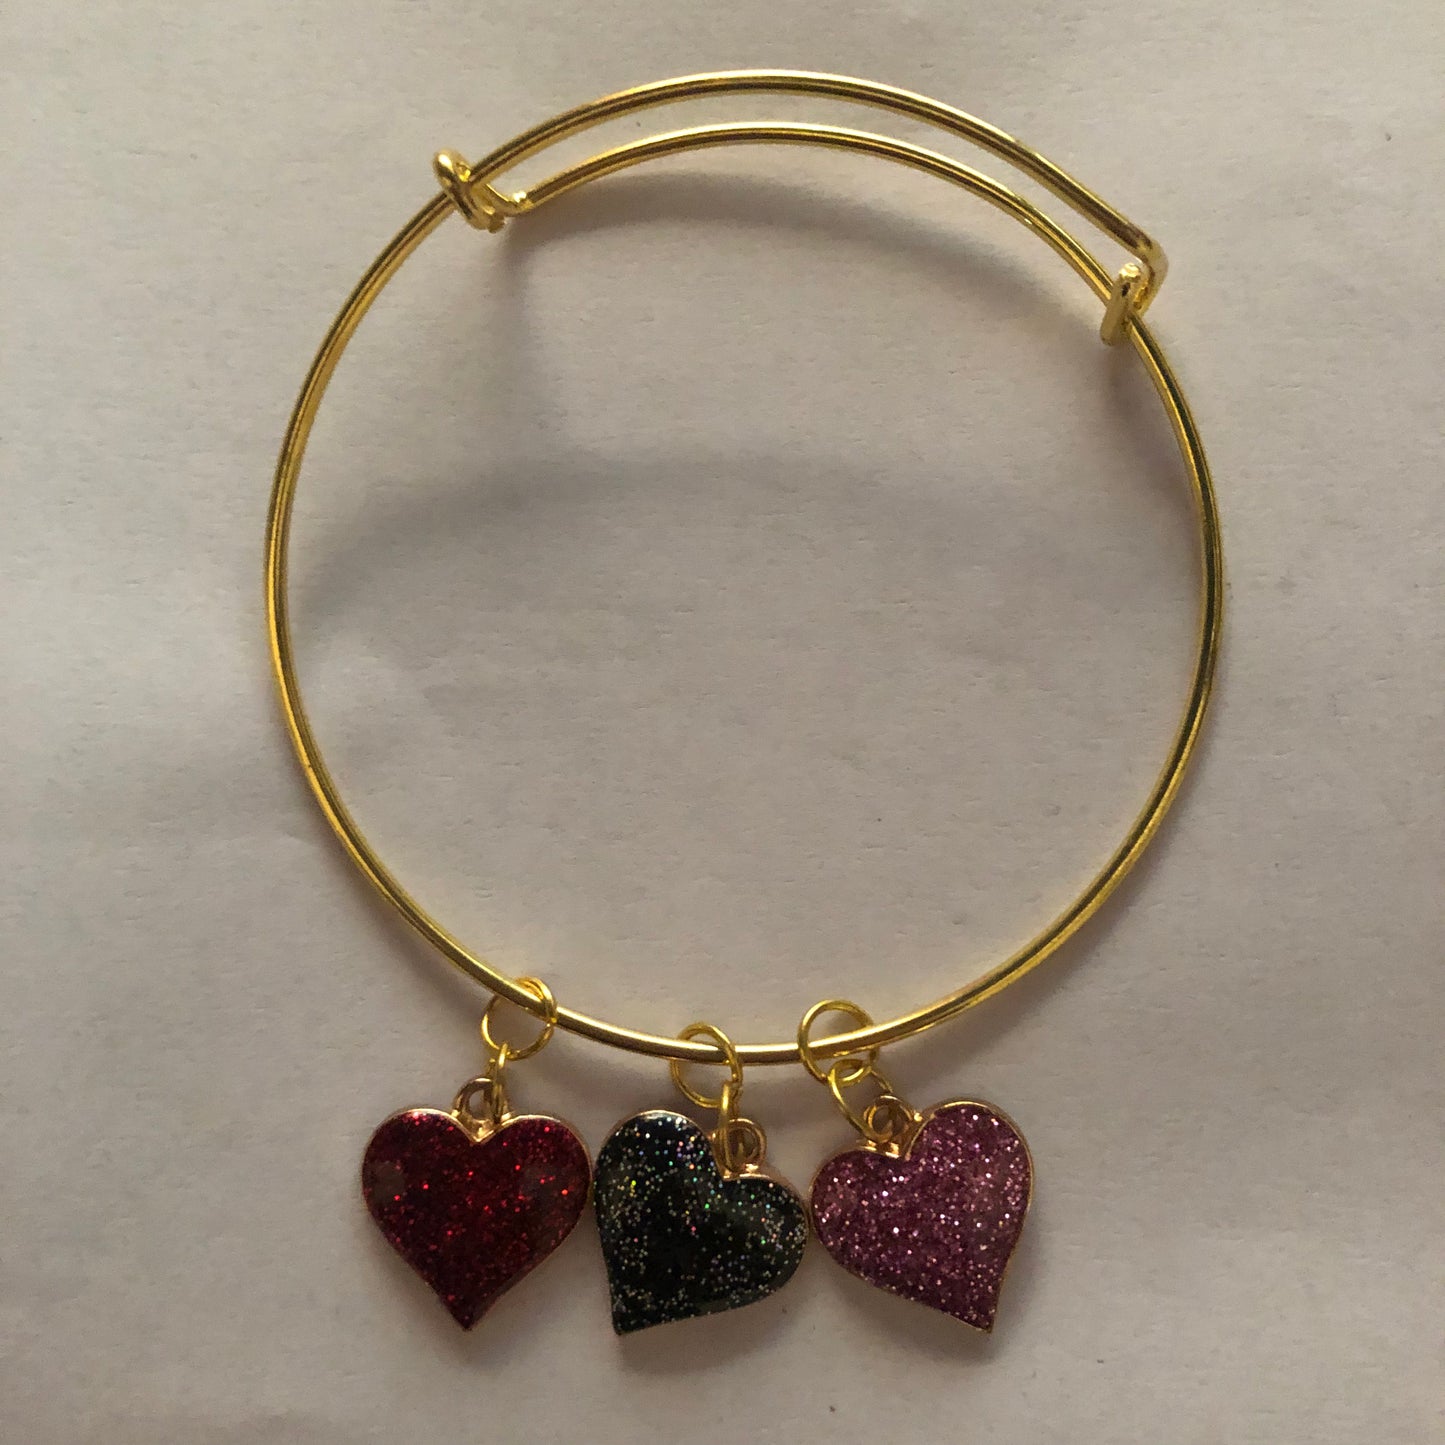 Valentine’s Day Charm Bracelet with heart-shaped charms